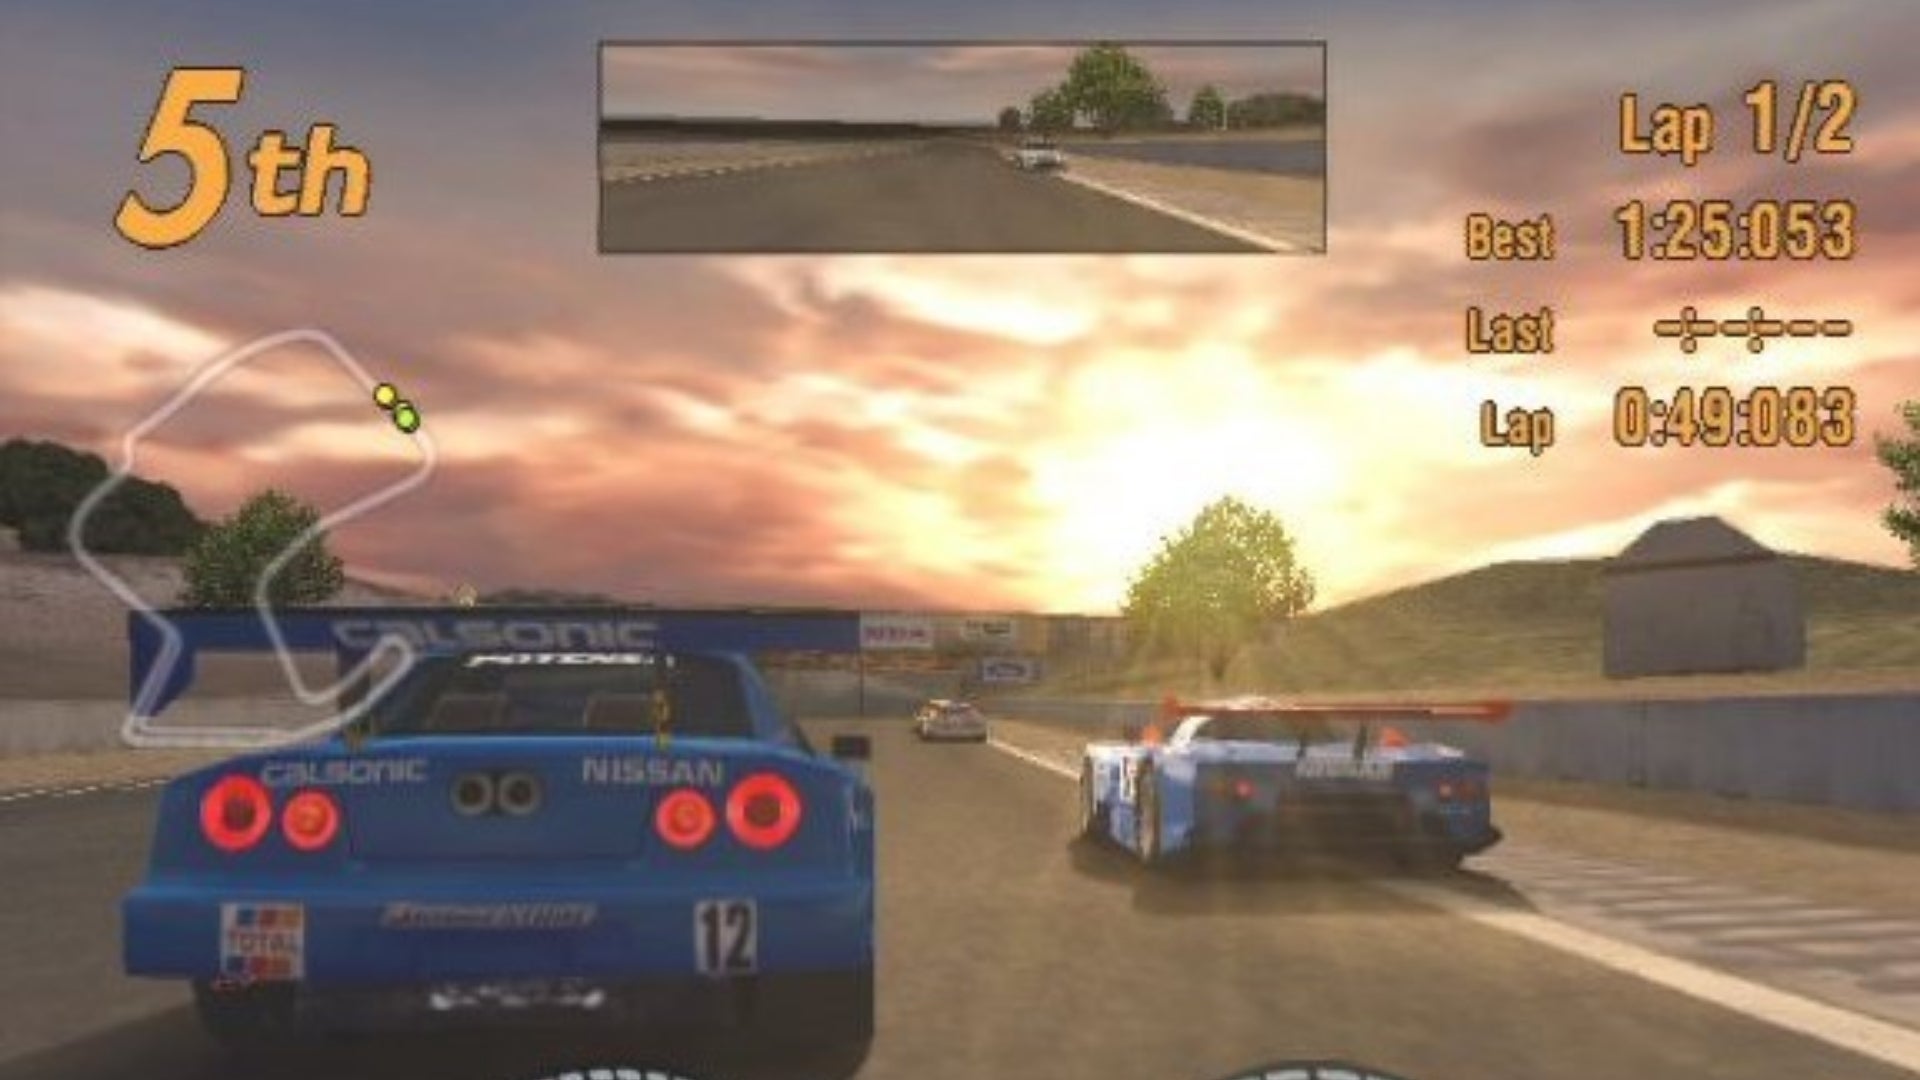 Multiple cars race one another in Gran Turismo 3, with the player being 5th